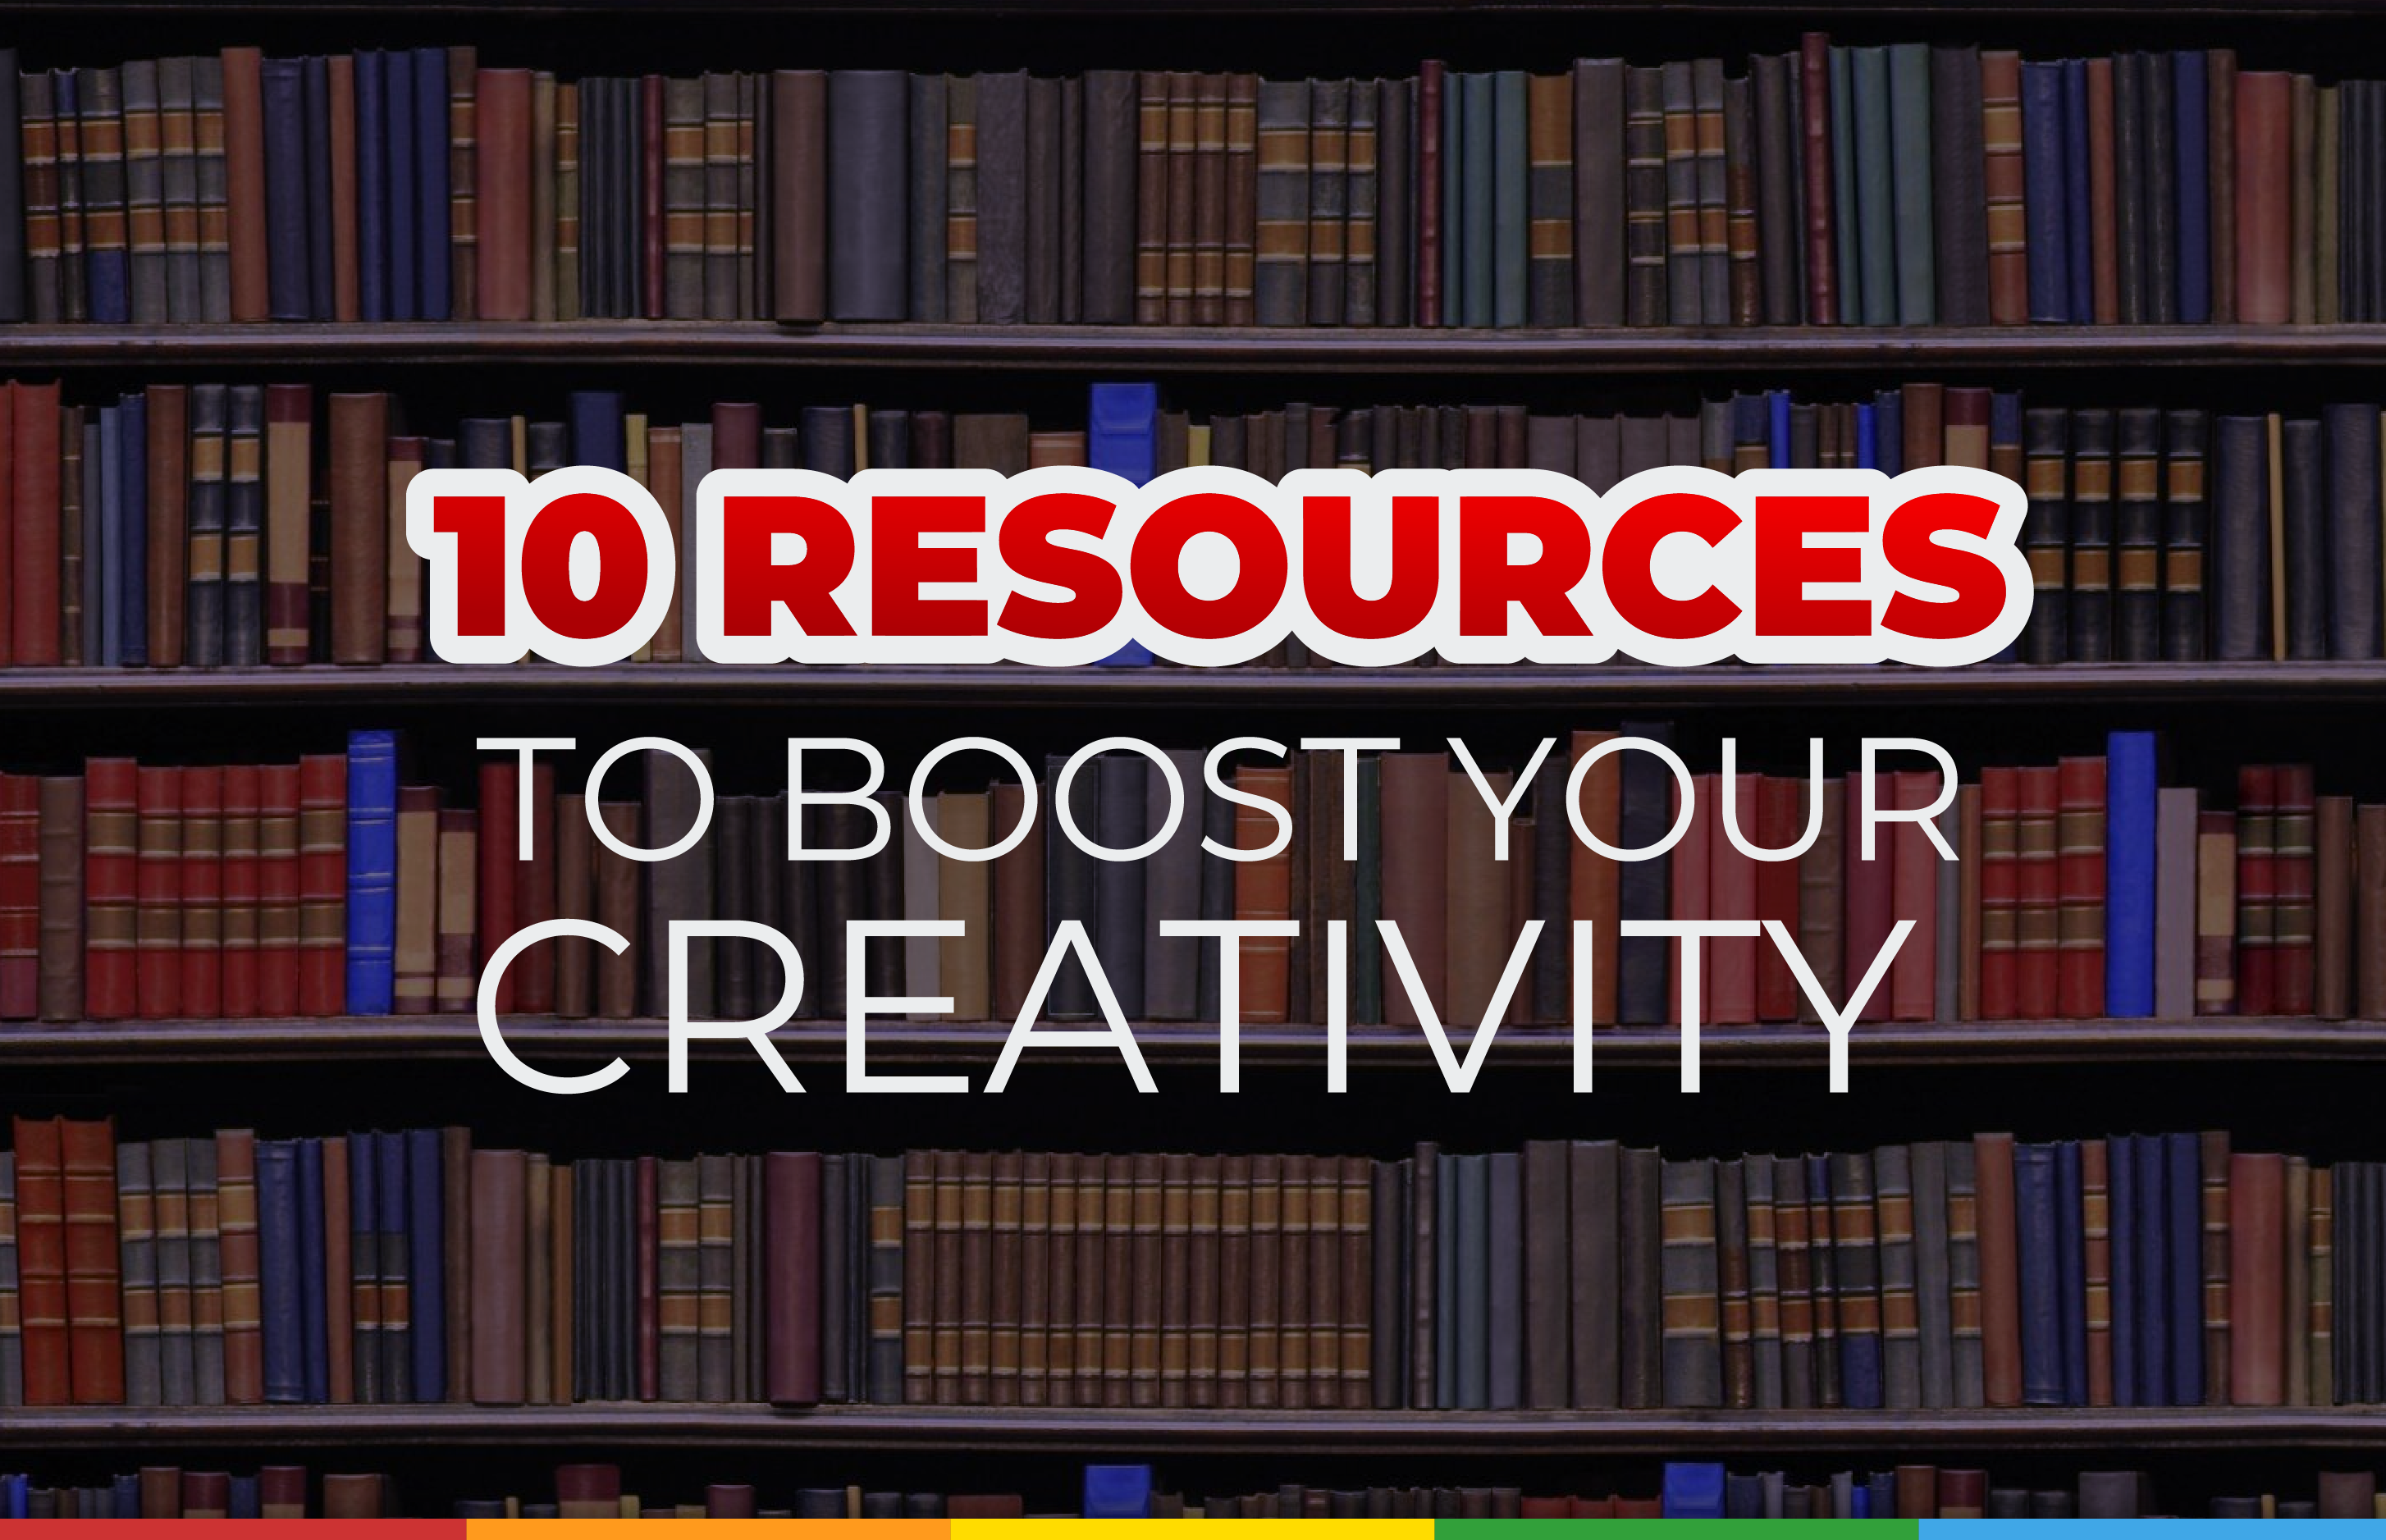 10 resources to boost your creativity